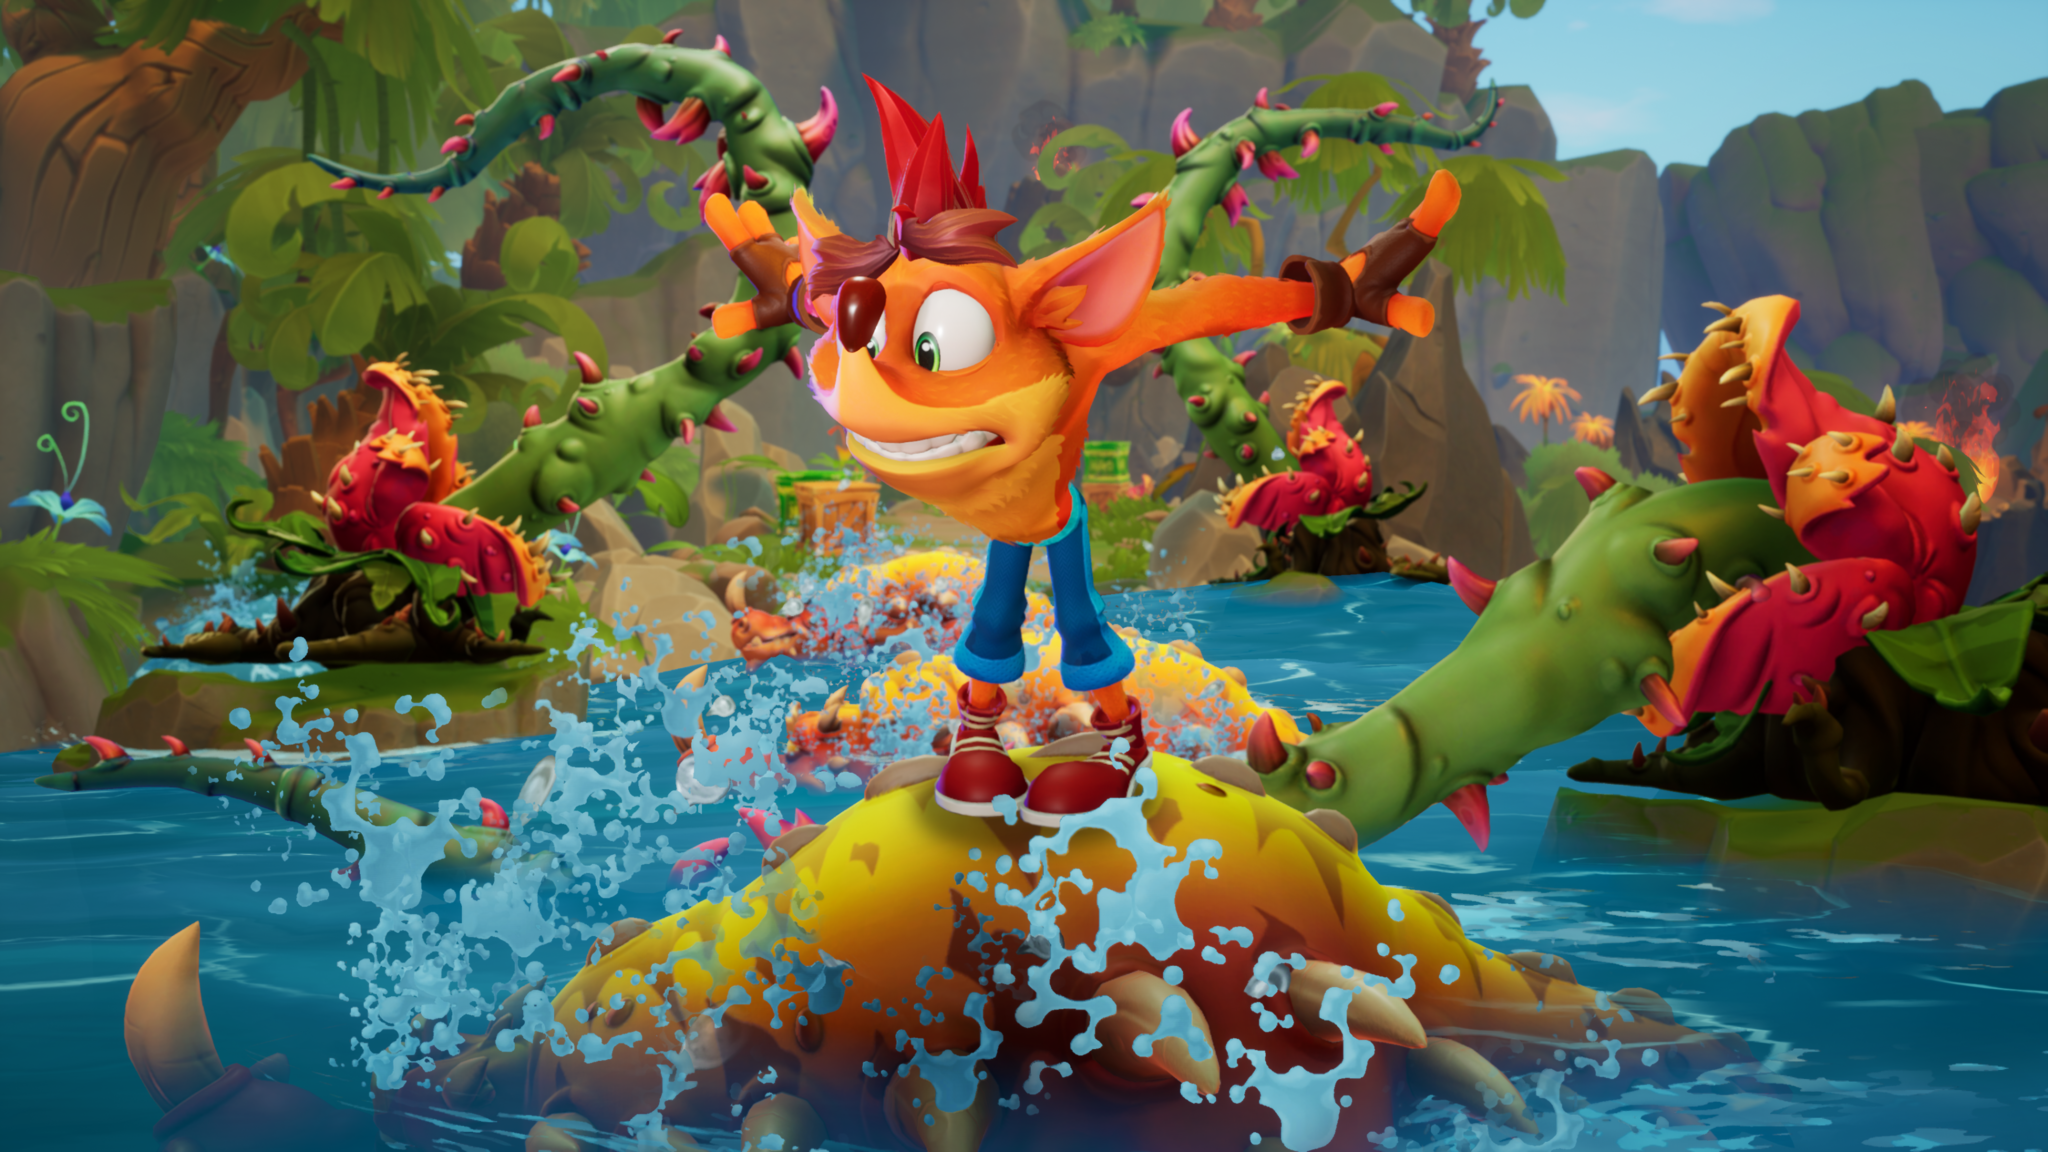 Crash Bandicoot 4: It's About Time gets PS5 upgrade in March 2021